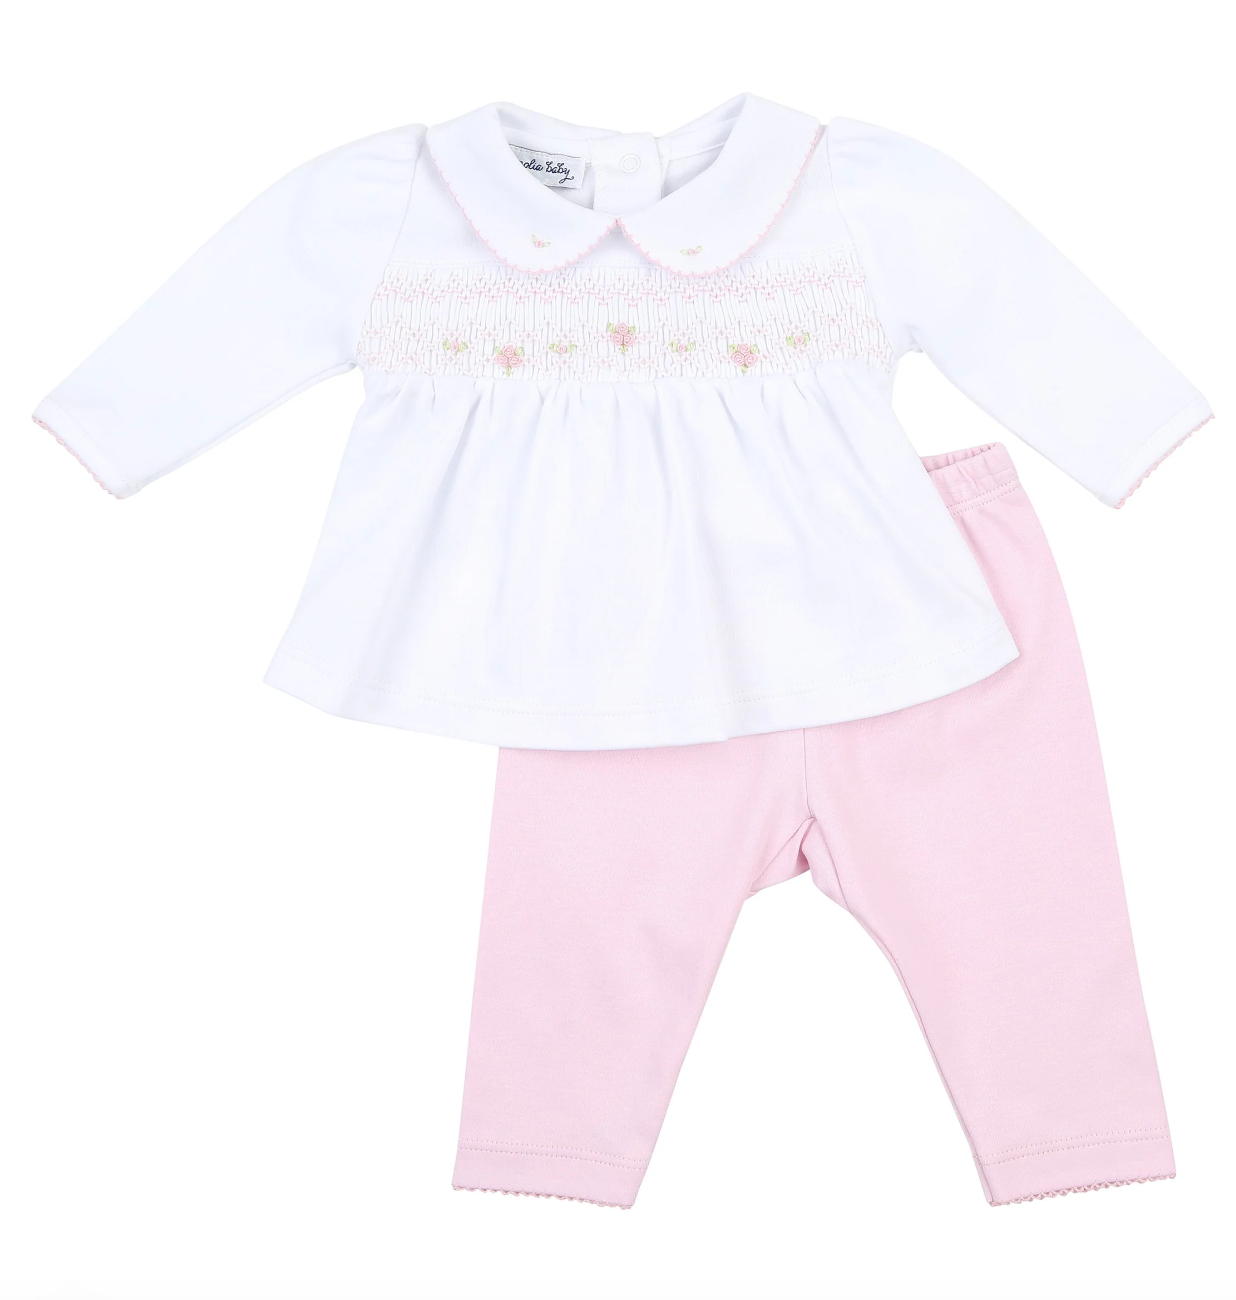 Delaney and Dillon Pink Smocked Collared 2 pc Pant Set Magnolia Baby